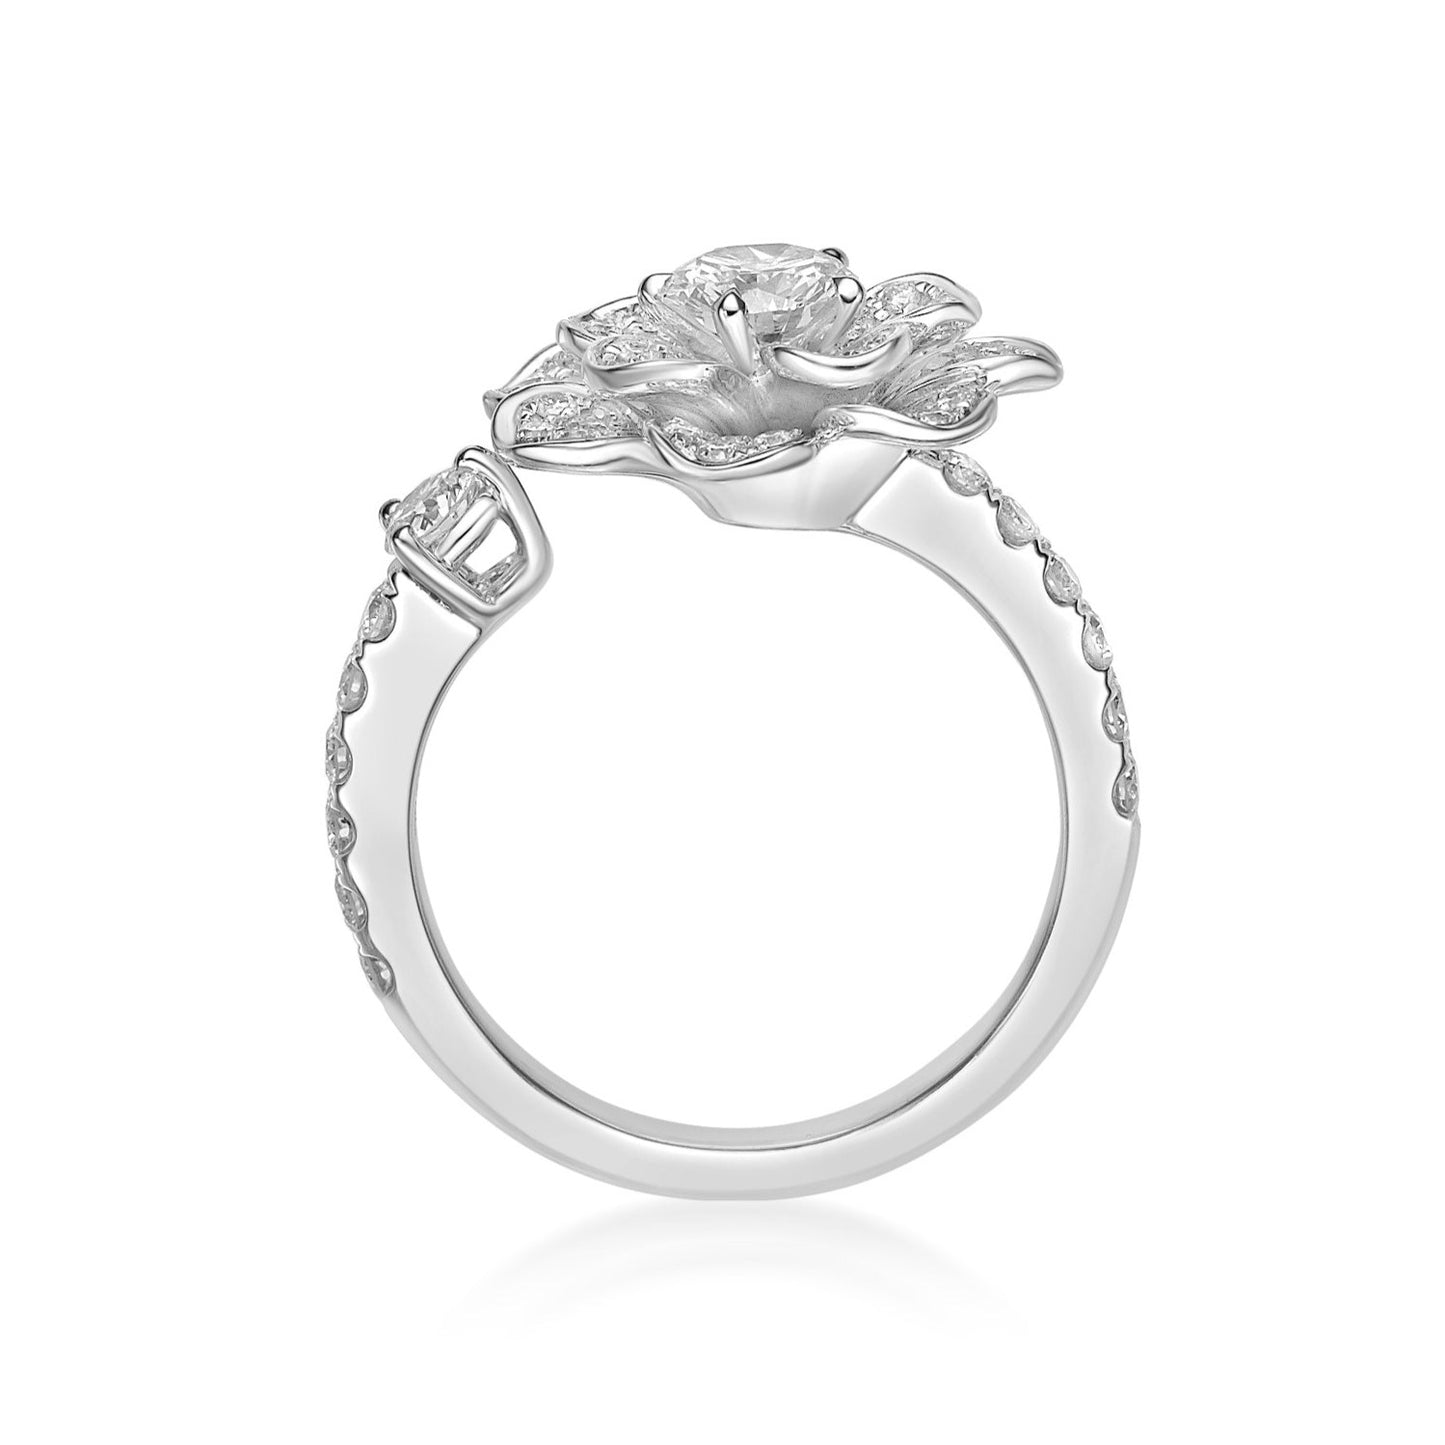 Pave Floral Diamond ring with 50pt Round Brilliant diamond and offset band